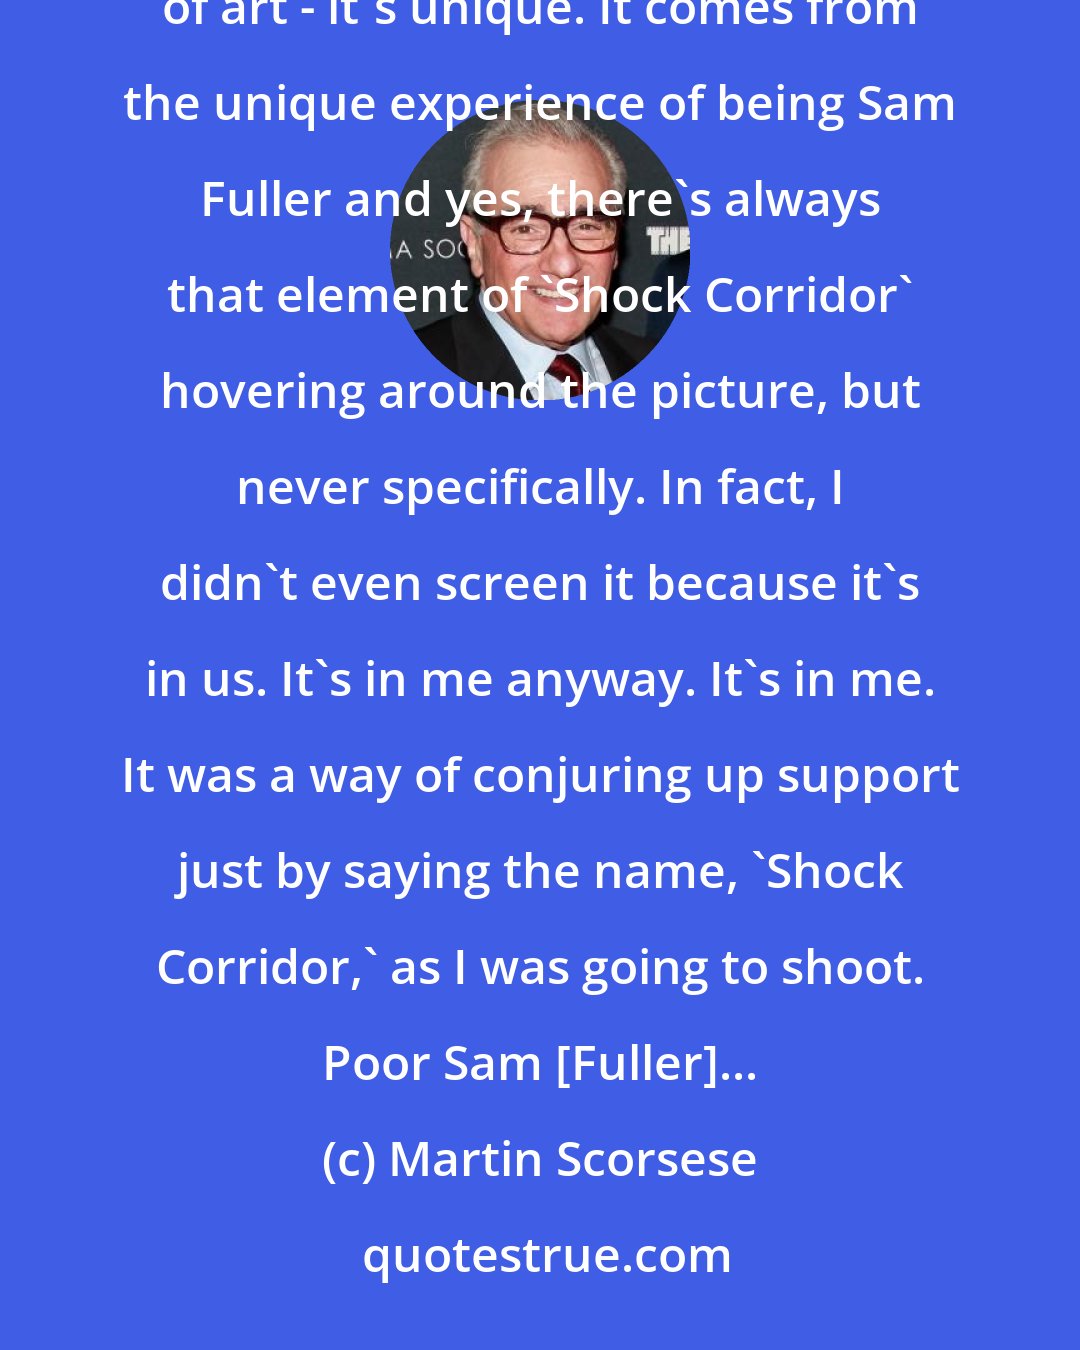 Martin Scorsese: Sam Fuller and 'Shock Corridor' can only be conjured as a mantra. 'Shock Corridor' is a classic work of art - it's unique. It comes from the unique experience of being Sam Fuller and yes, there's always that element of 'Shock Corridor' hovering around the picture, but never specifically. In fact, I didn't even screen it because it's in us. It's in me anyway. It's in me. It was a way of conjuring up support just by saying the name, 'Shock Corridor,' as I was going to shoot. Poor Sam [Fuller]...